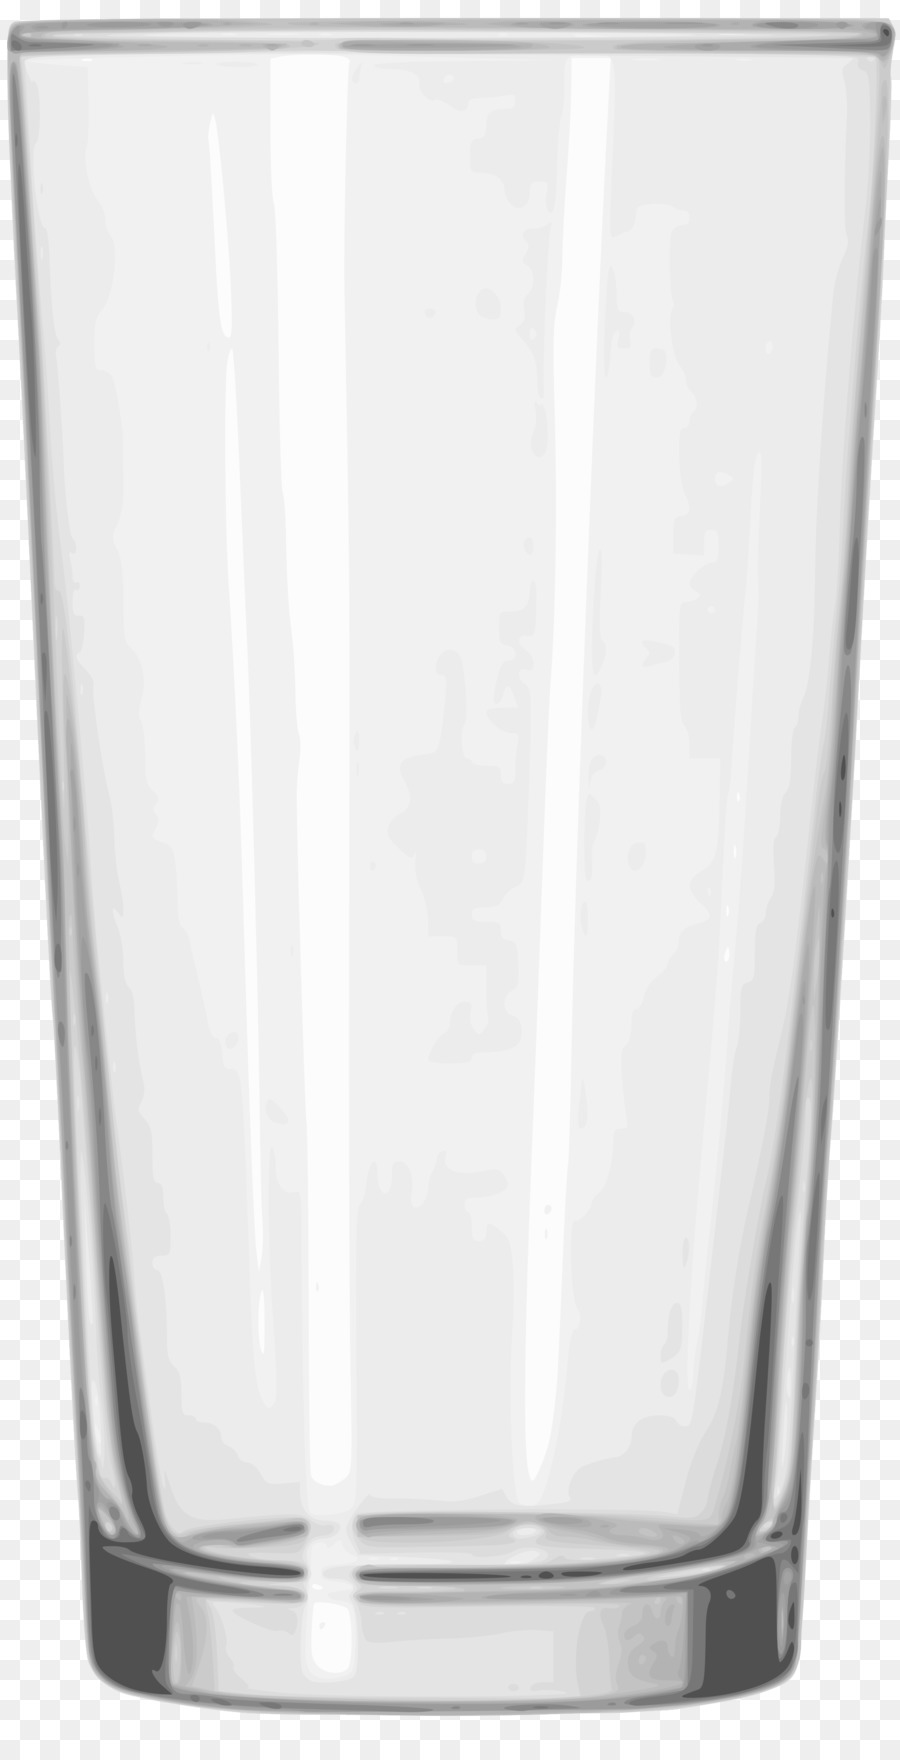 Iced tea Glass Cup Tumbler - Drinking Glass PNG Image png download - 2000*3871 - Free Transparent Tea png Download.